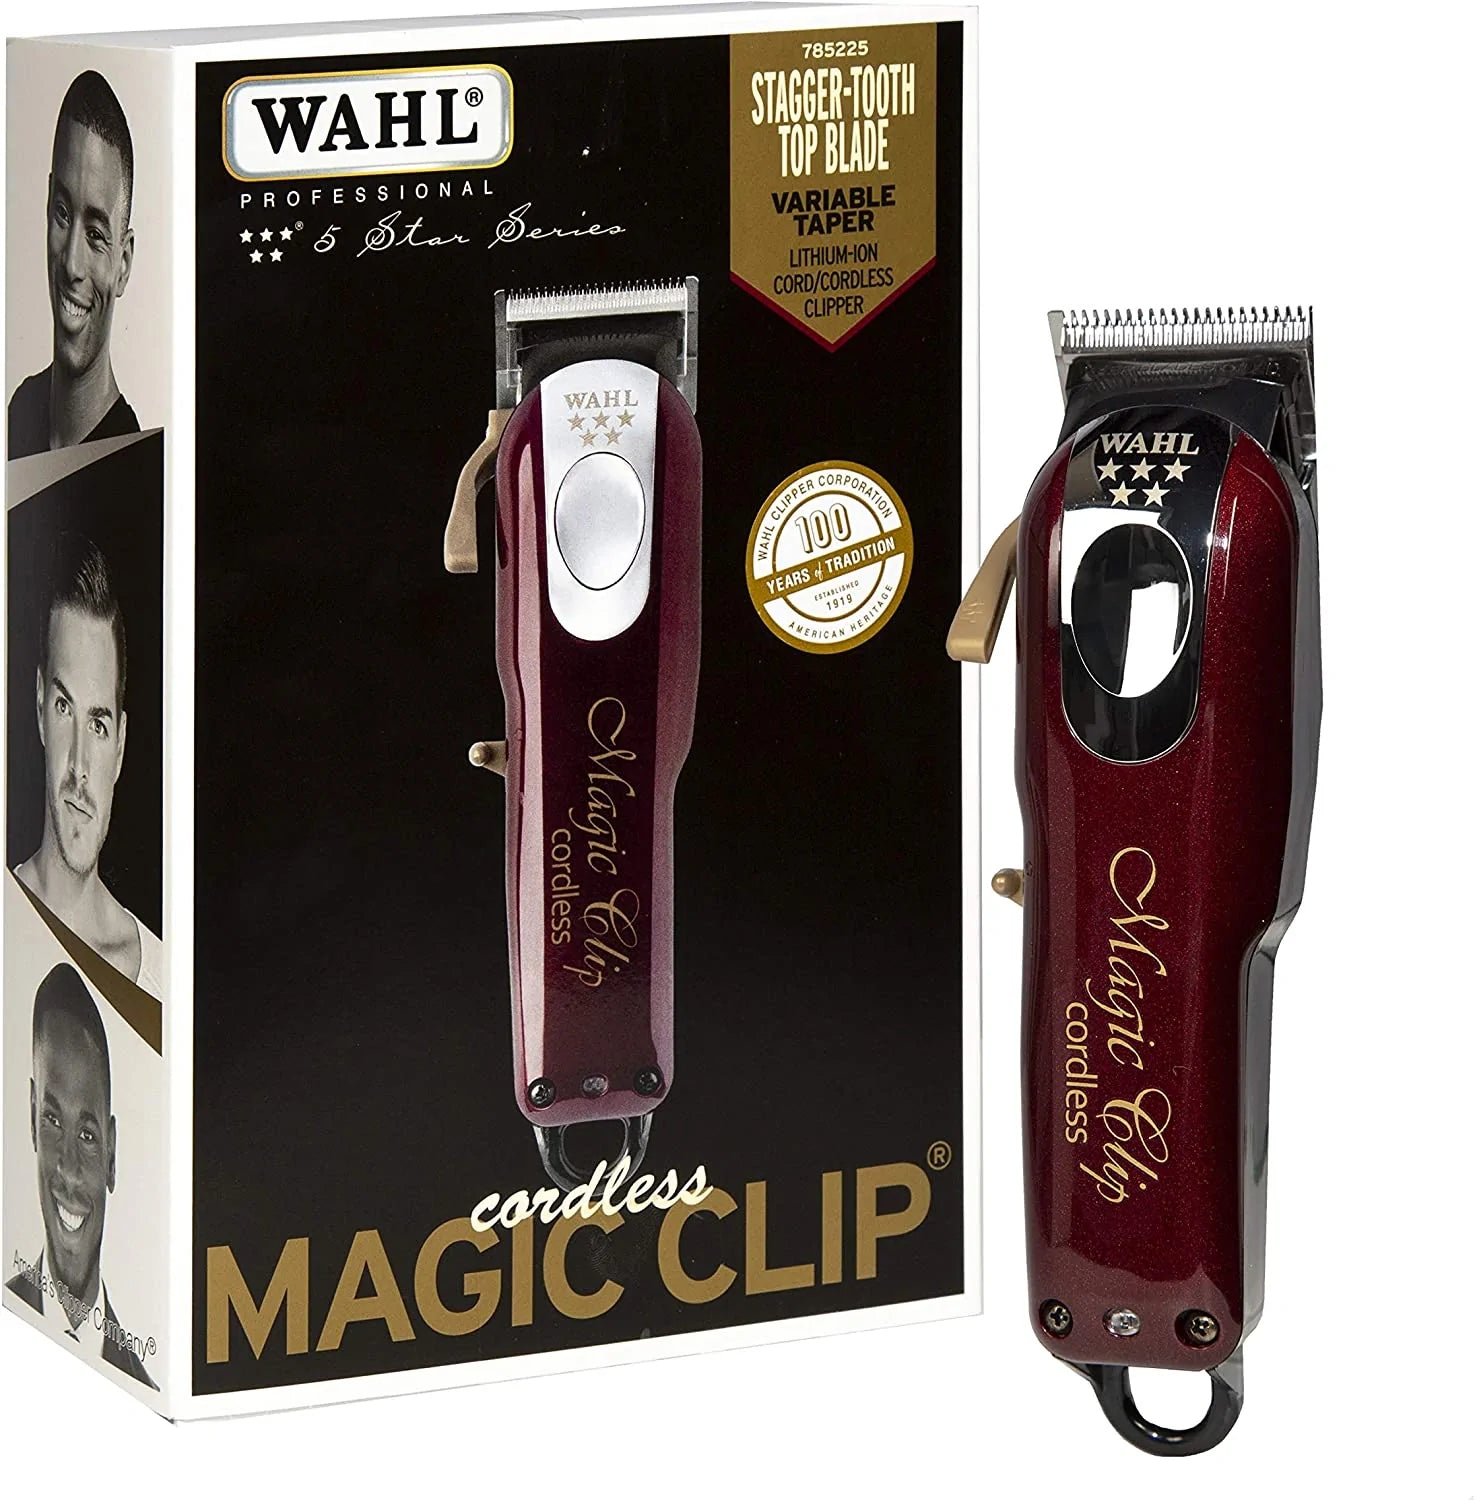 Wahl Professional 5 Star Series Cordless Magic Clip stagger-tooth blade